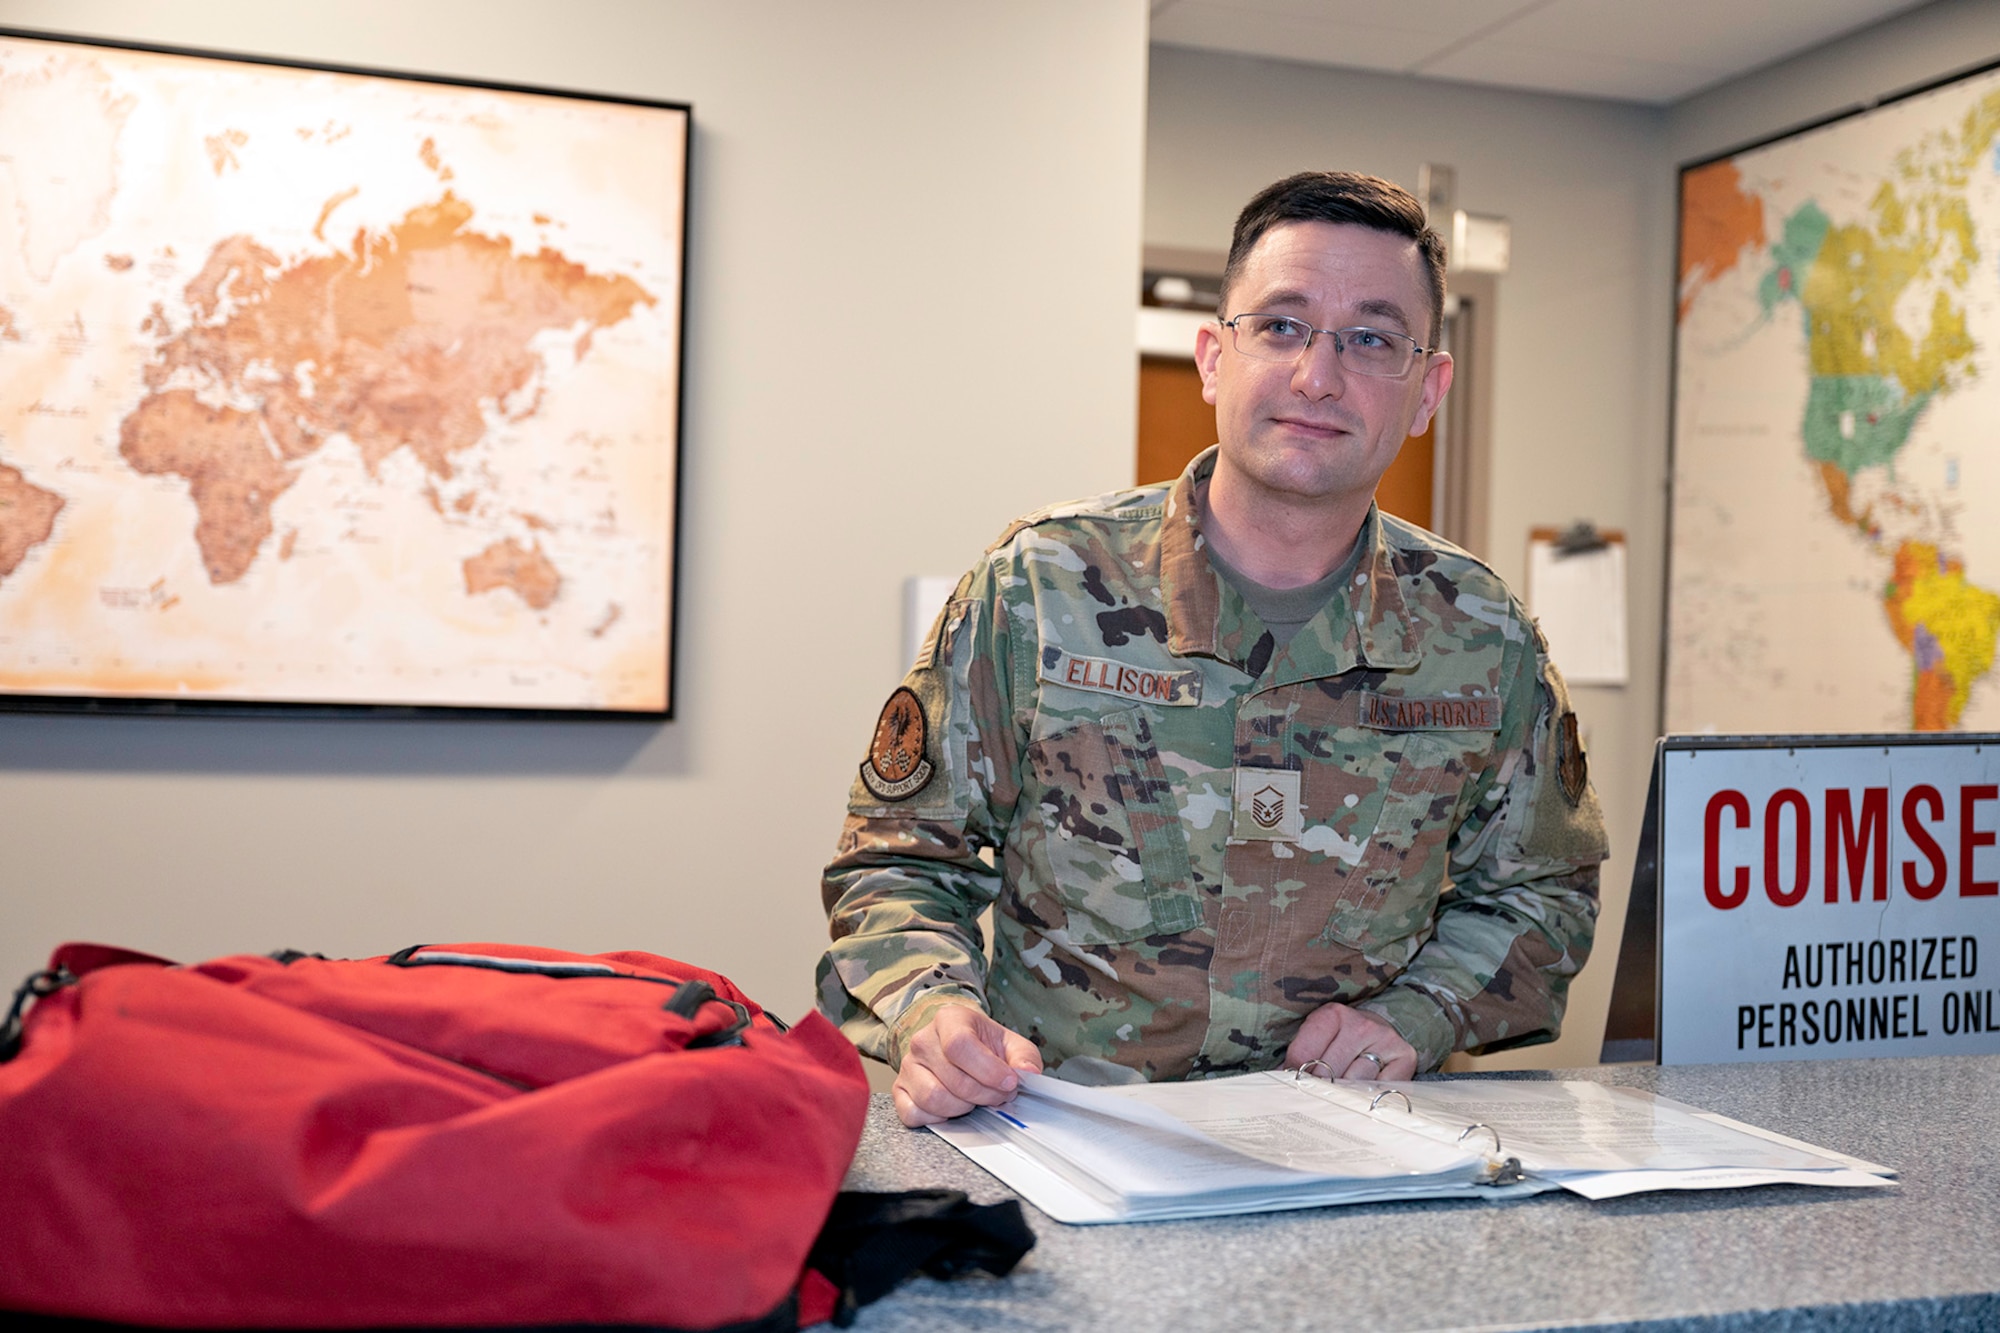 Master Sgt. William Ellison, 434th Combat Crew Communications Training Senior Non-commissioned Officer, reviews a binder of standard operating procedures while standing at a counter. Maps of the world are visible, yet blurred, behind him.